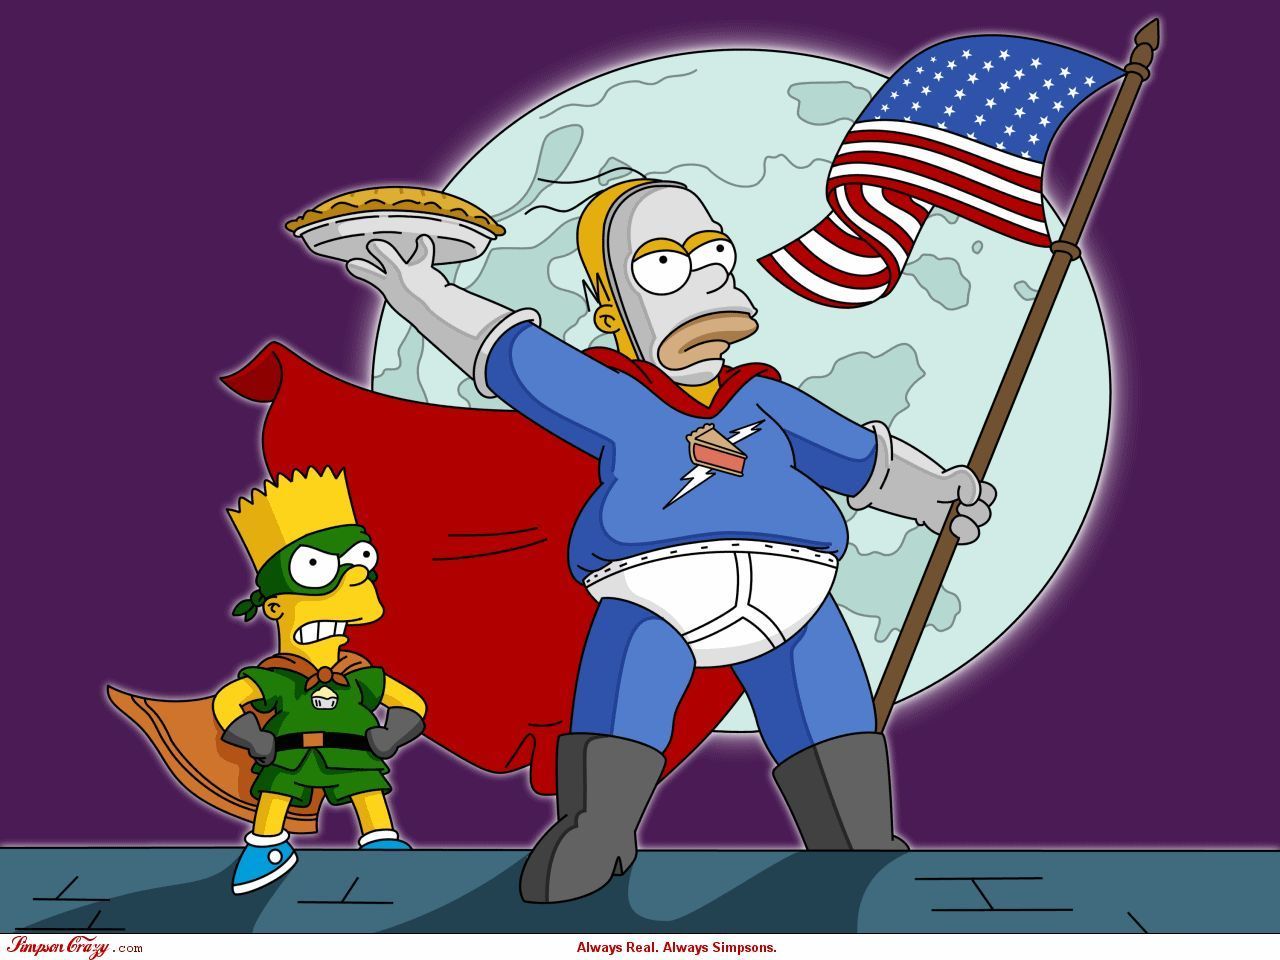 Homer and Bart Simpson in their superhero costumes, with the American flag and a pie. - Homer Simpson